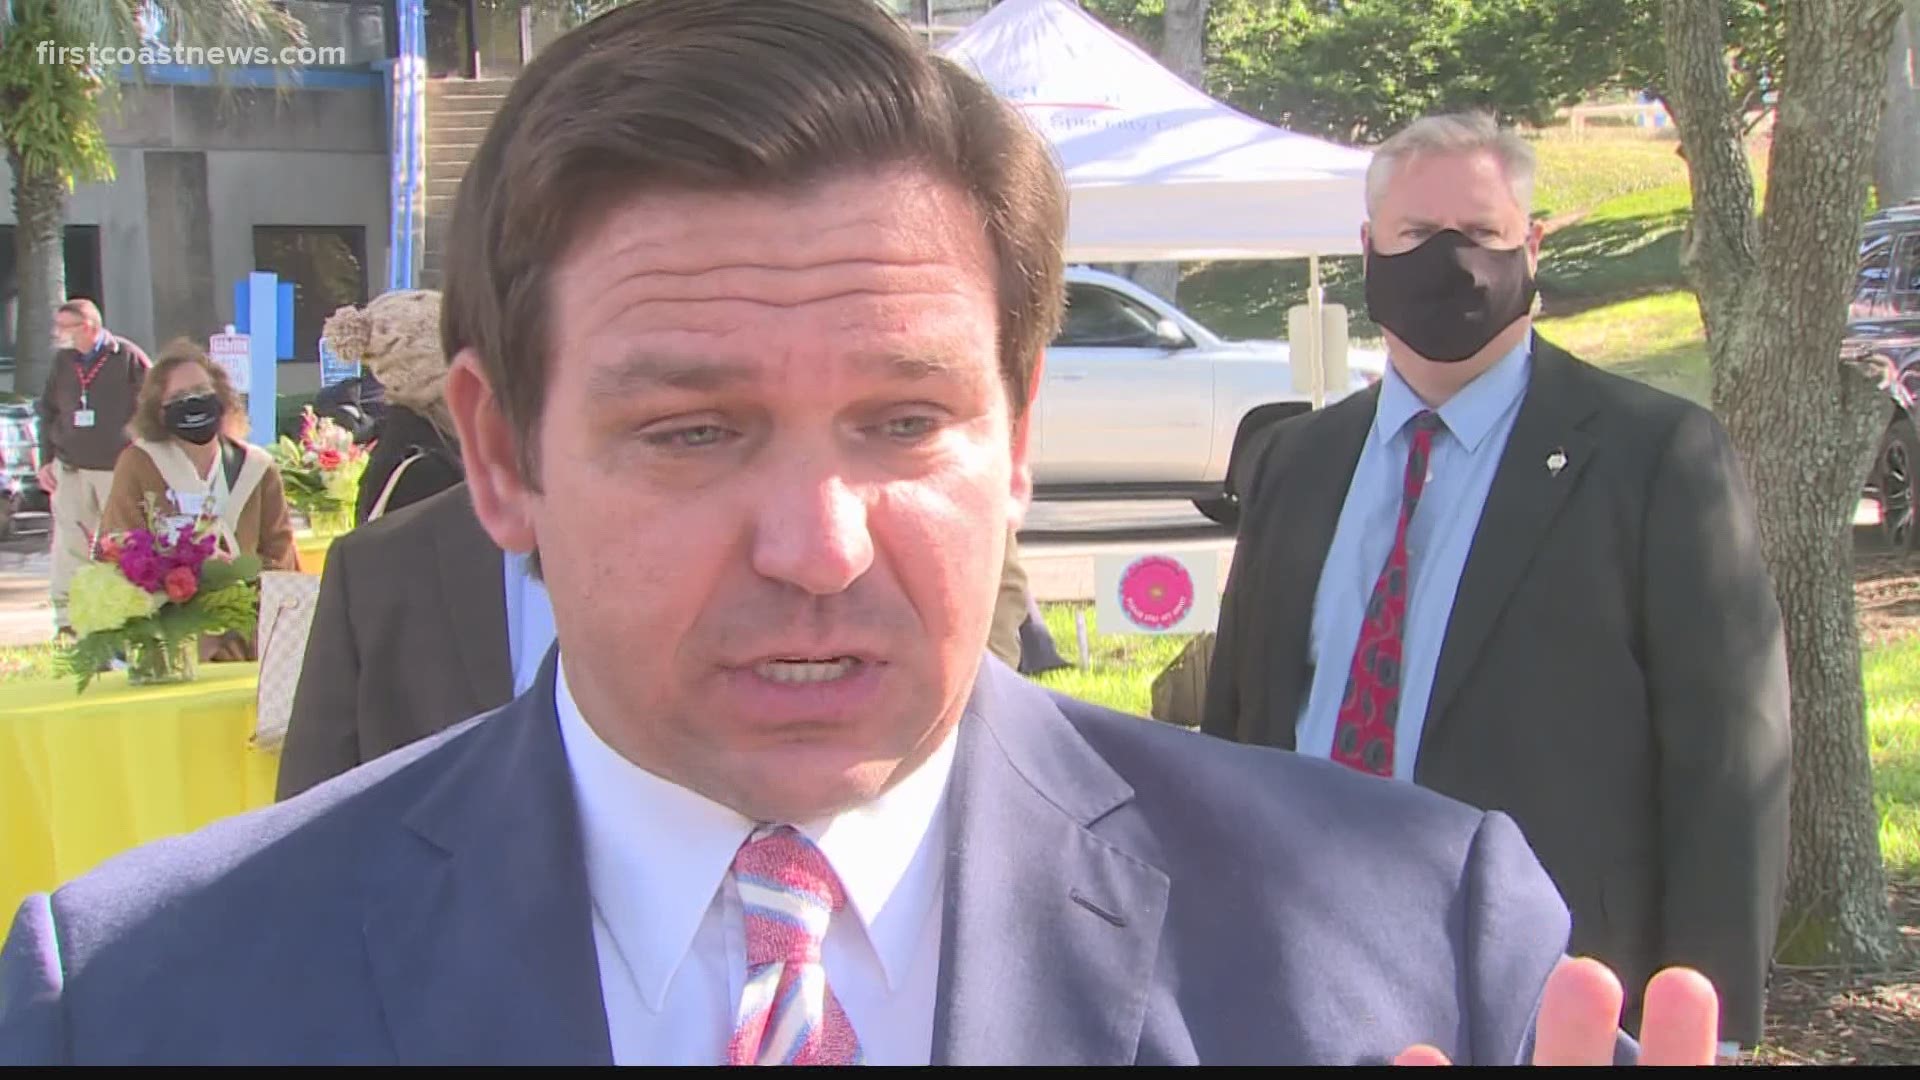 Florida Gov. Ron DeSantis said the state is ready to distribute the Pfizer COVID-19 vaccine once it's approved by the FDA.